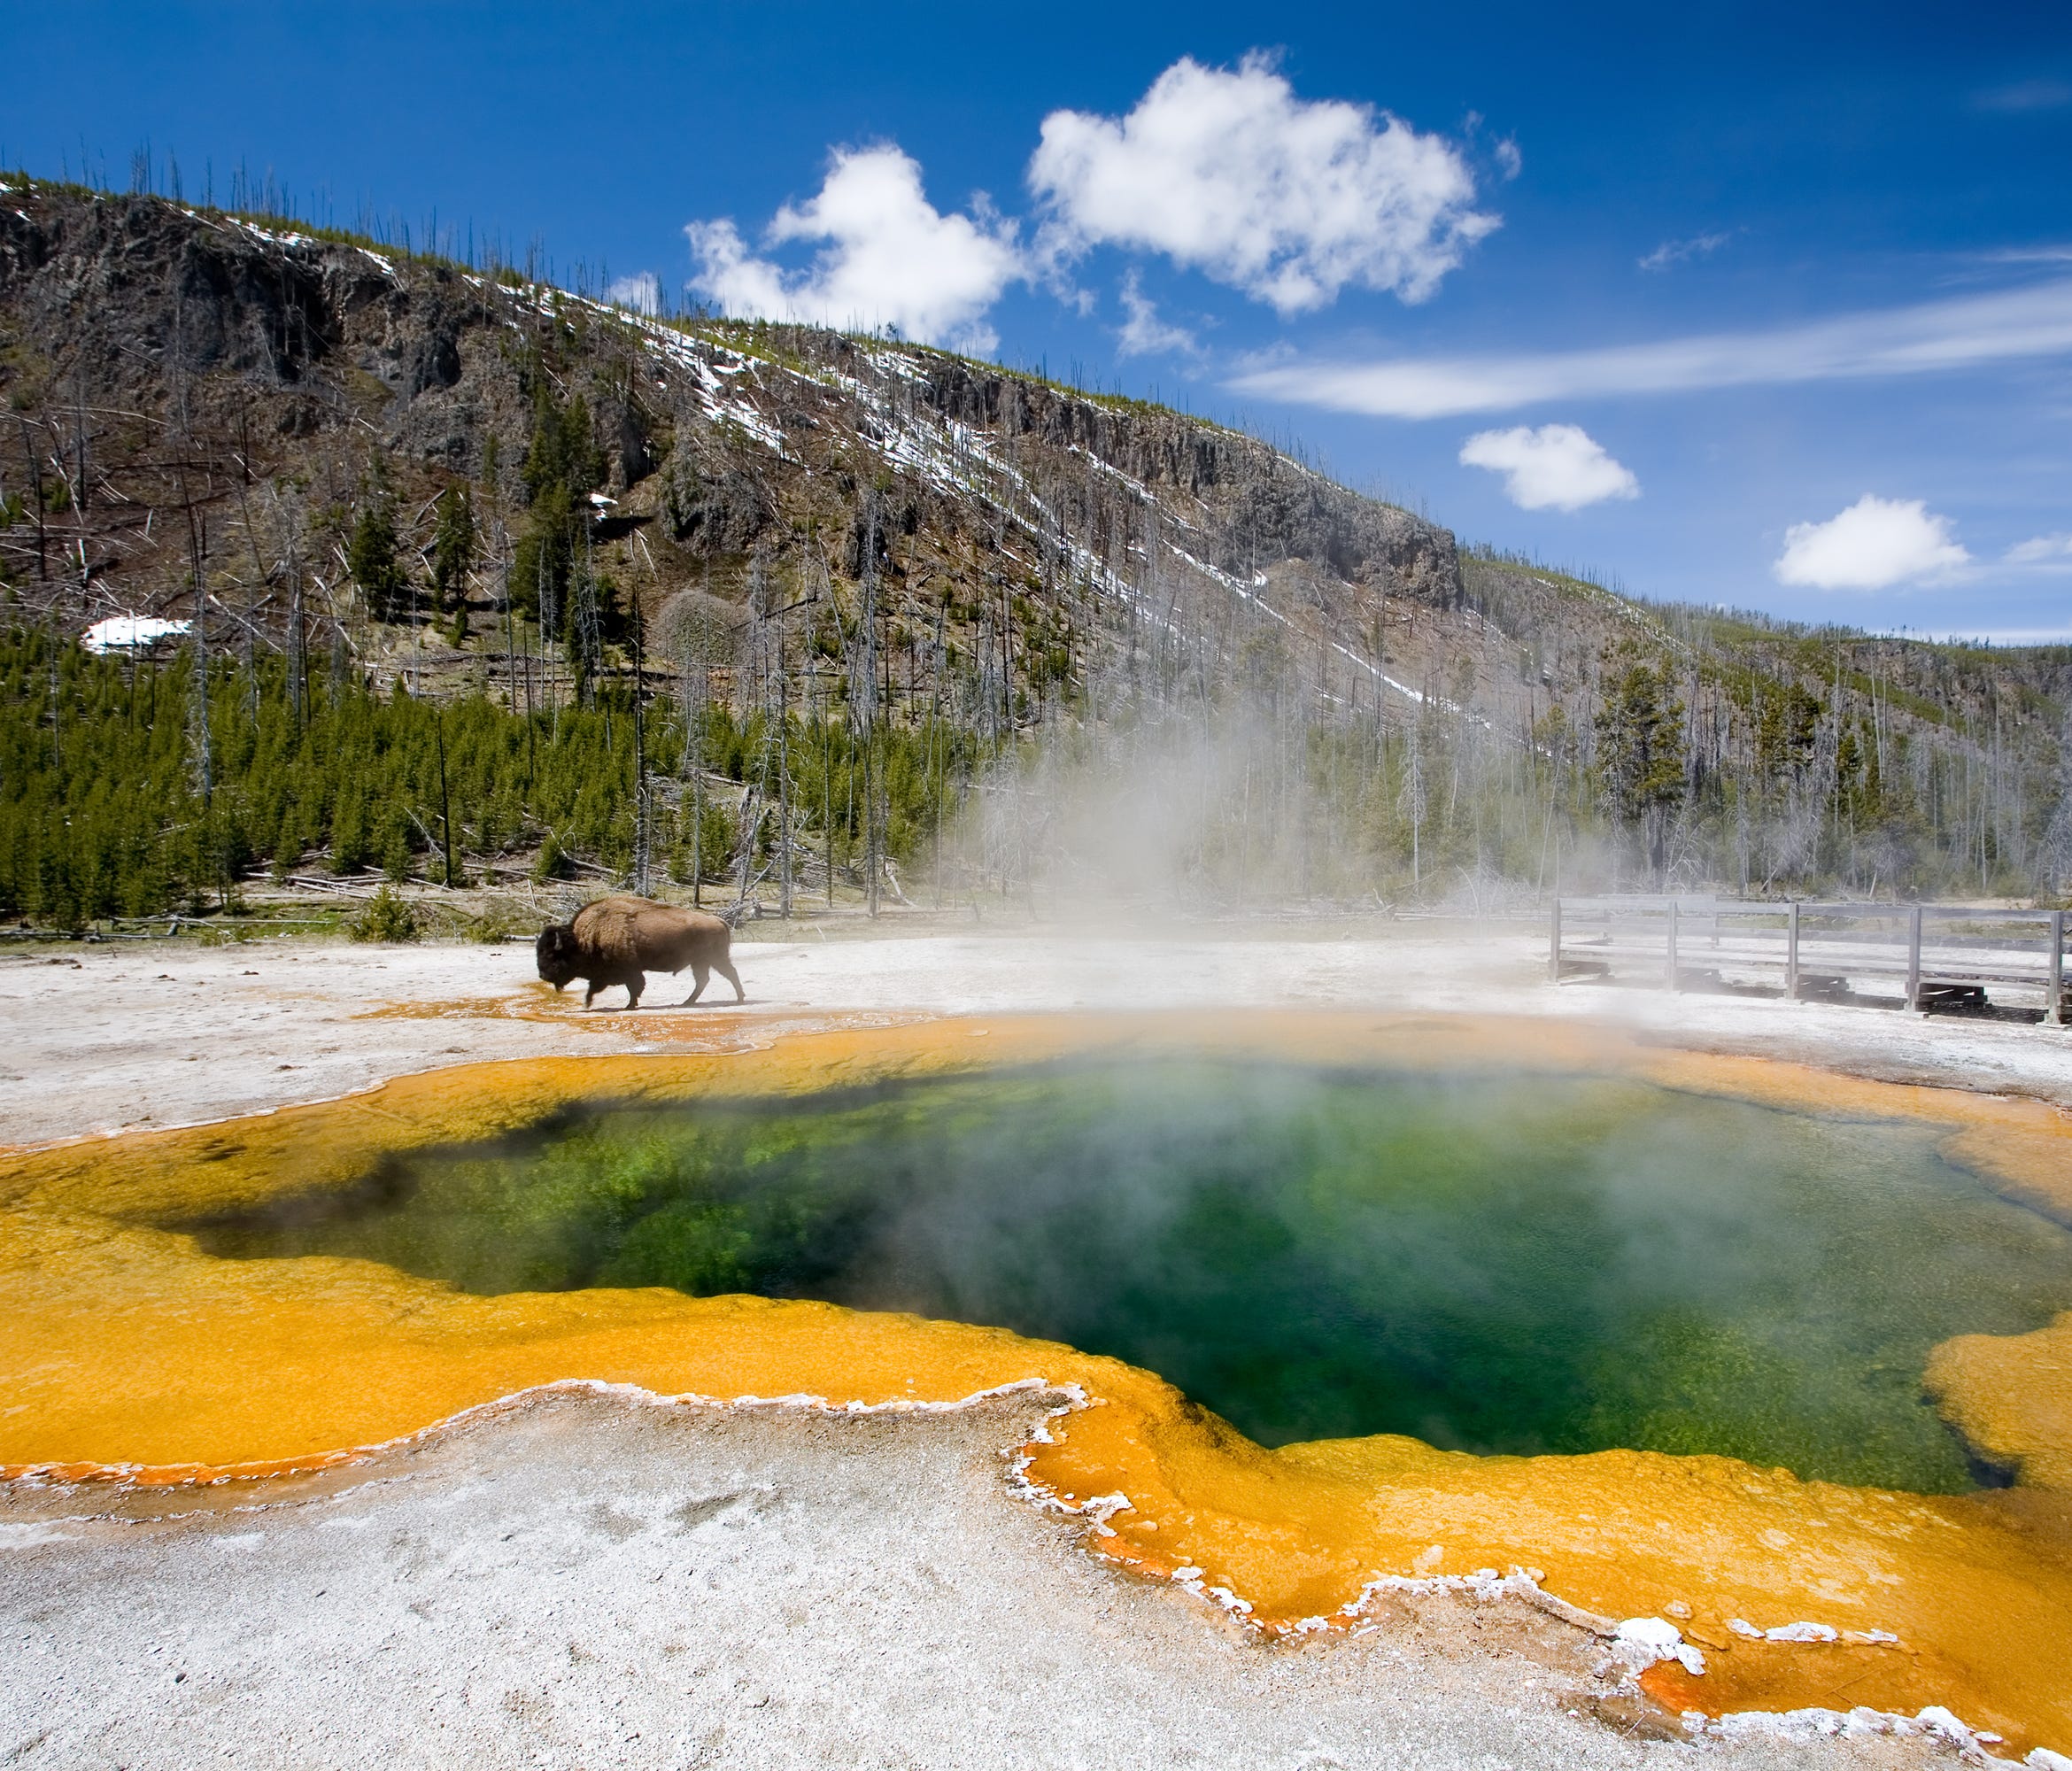 Experience bison, bears and the beauty of Yellowstone National Park: When Congress established Yellowstone as America's first national park in 1872, it was an idea that resonated the world over. Today this 3,500-square-mile public wilderness attracts